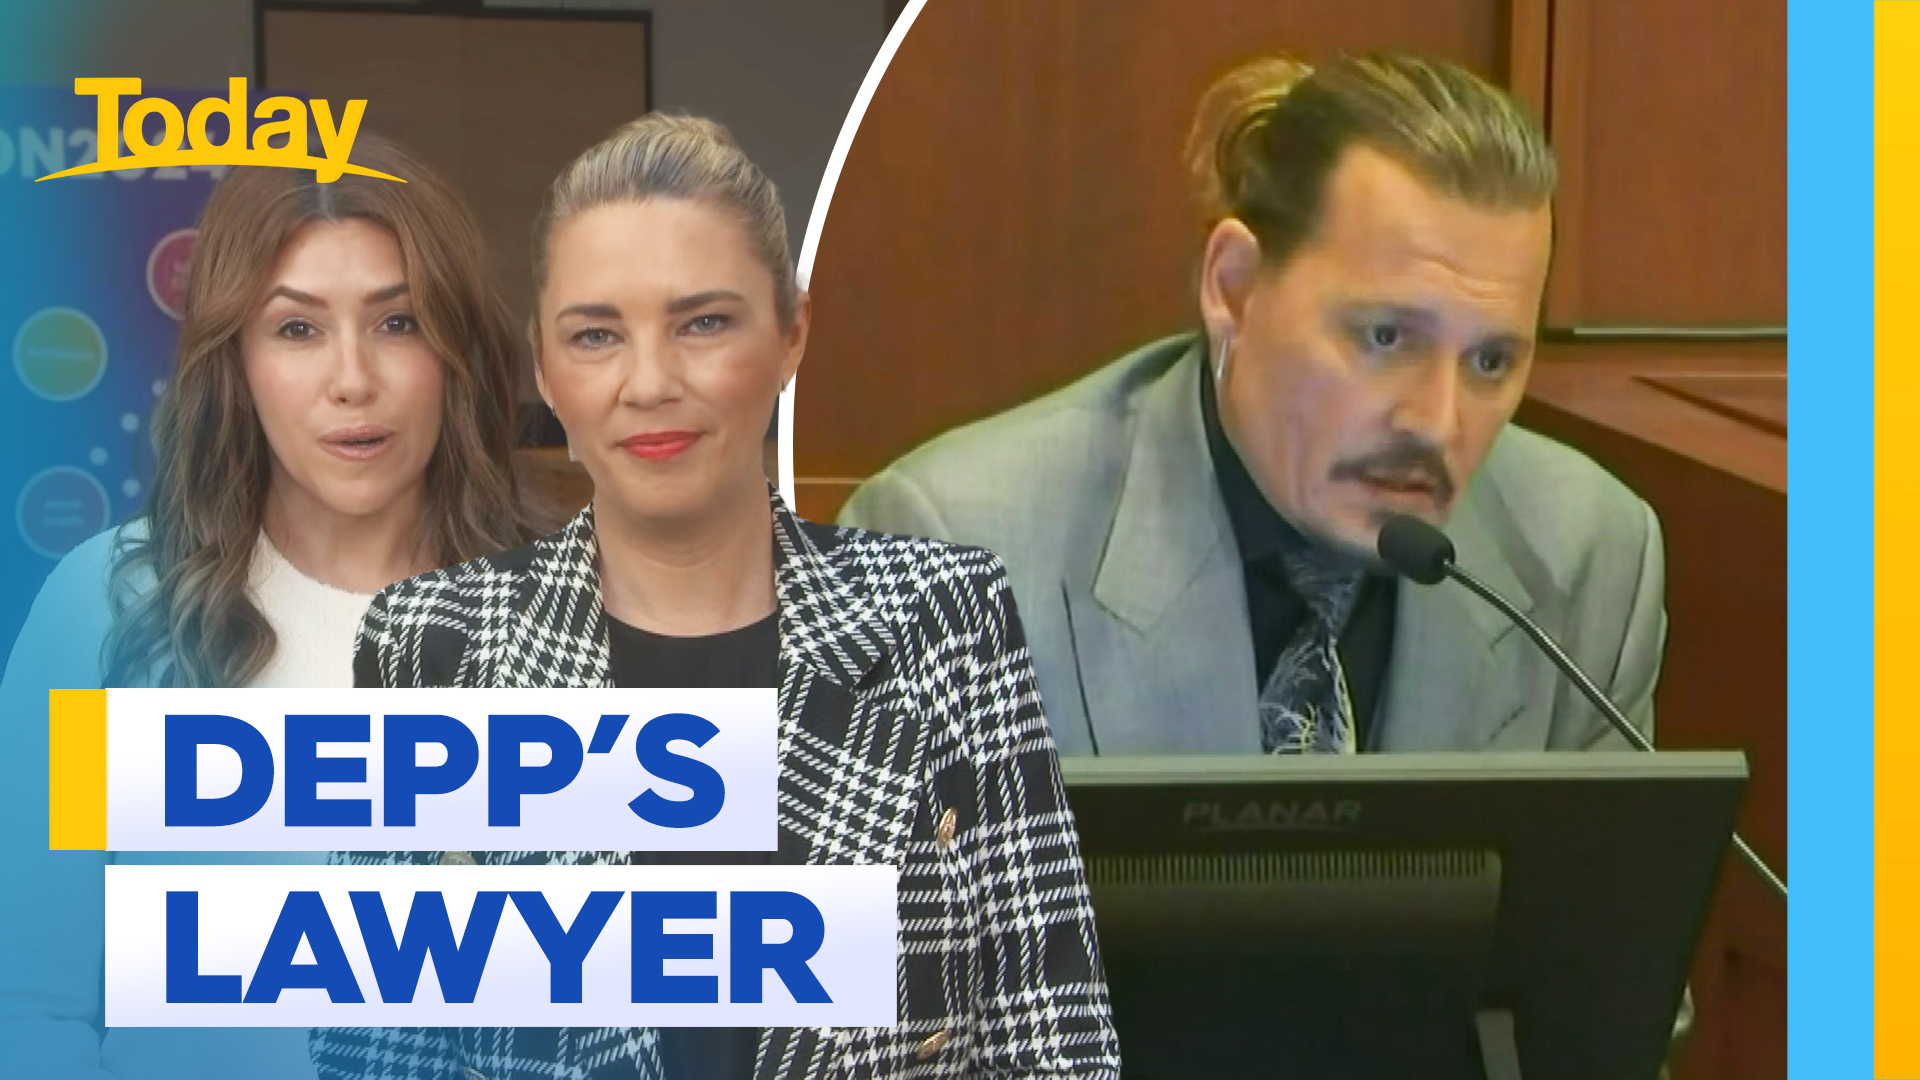 Johnny Depp's lawyer sits down with Today